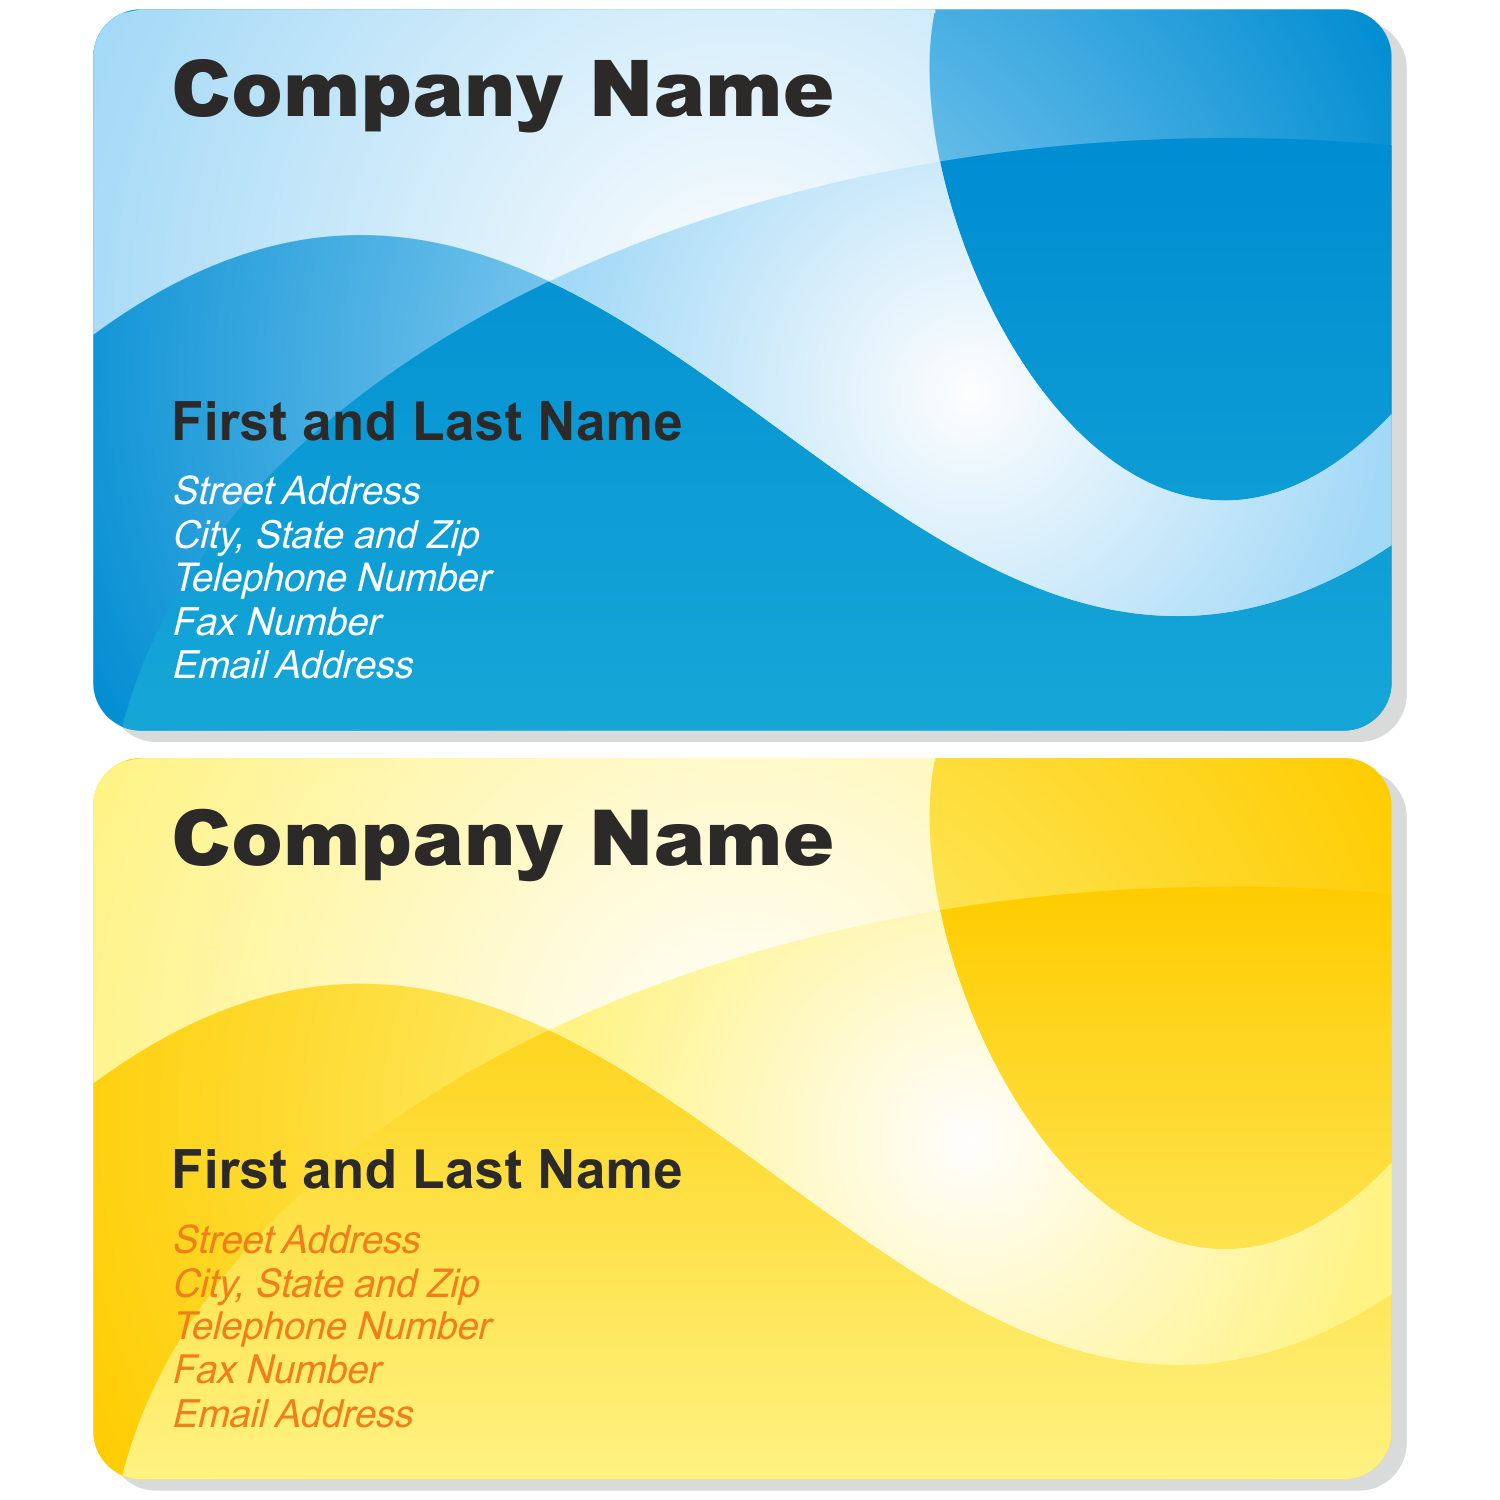 templates-for-business-cards-free-business-card-sample